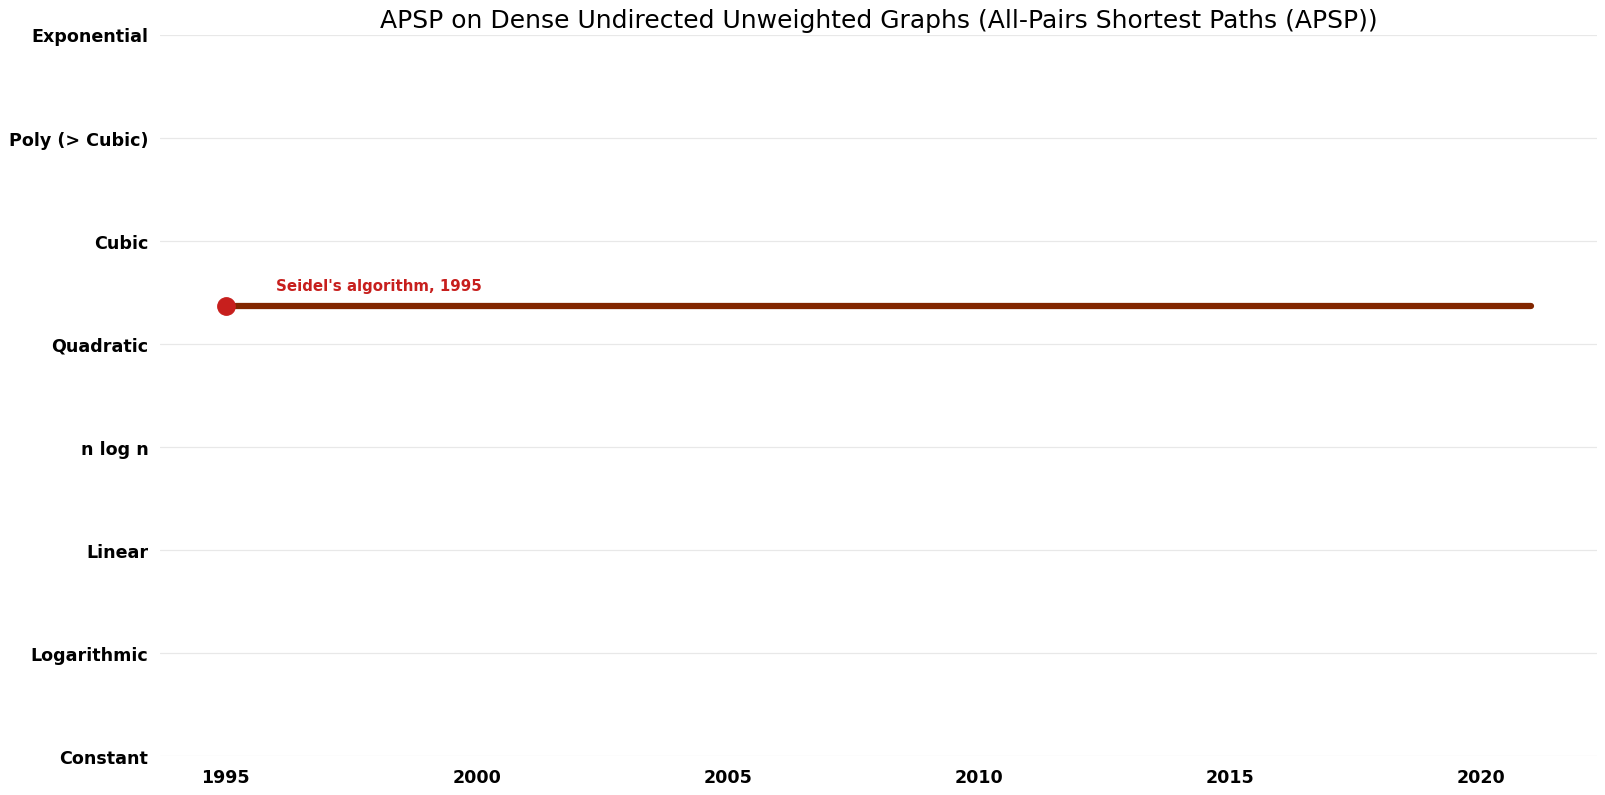 File:All-Pairs Shortest Paths (APSP) - APSP on Dense Undirected Unweighted Graphs - Time.png